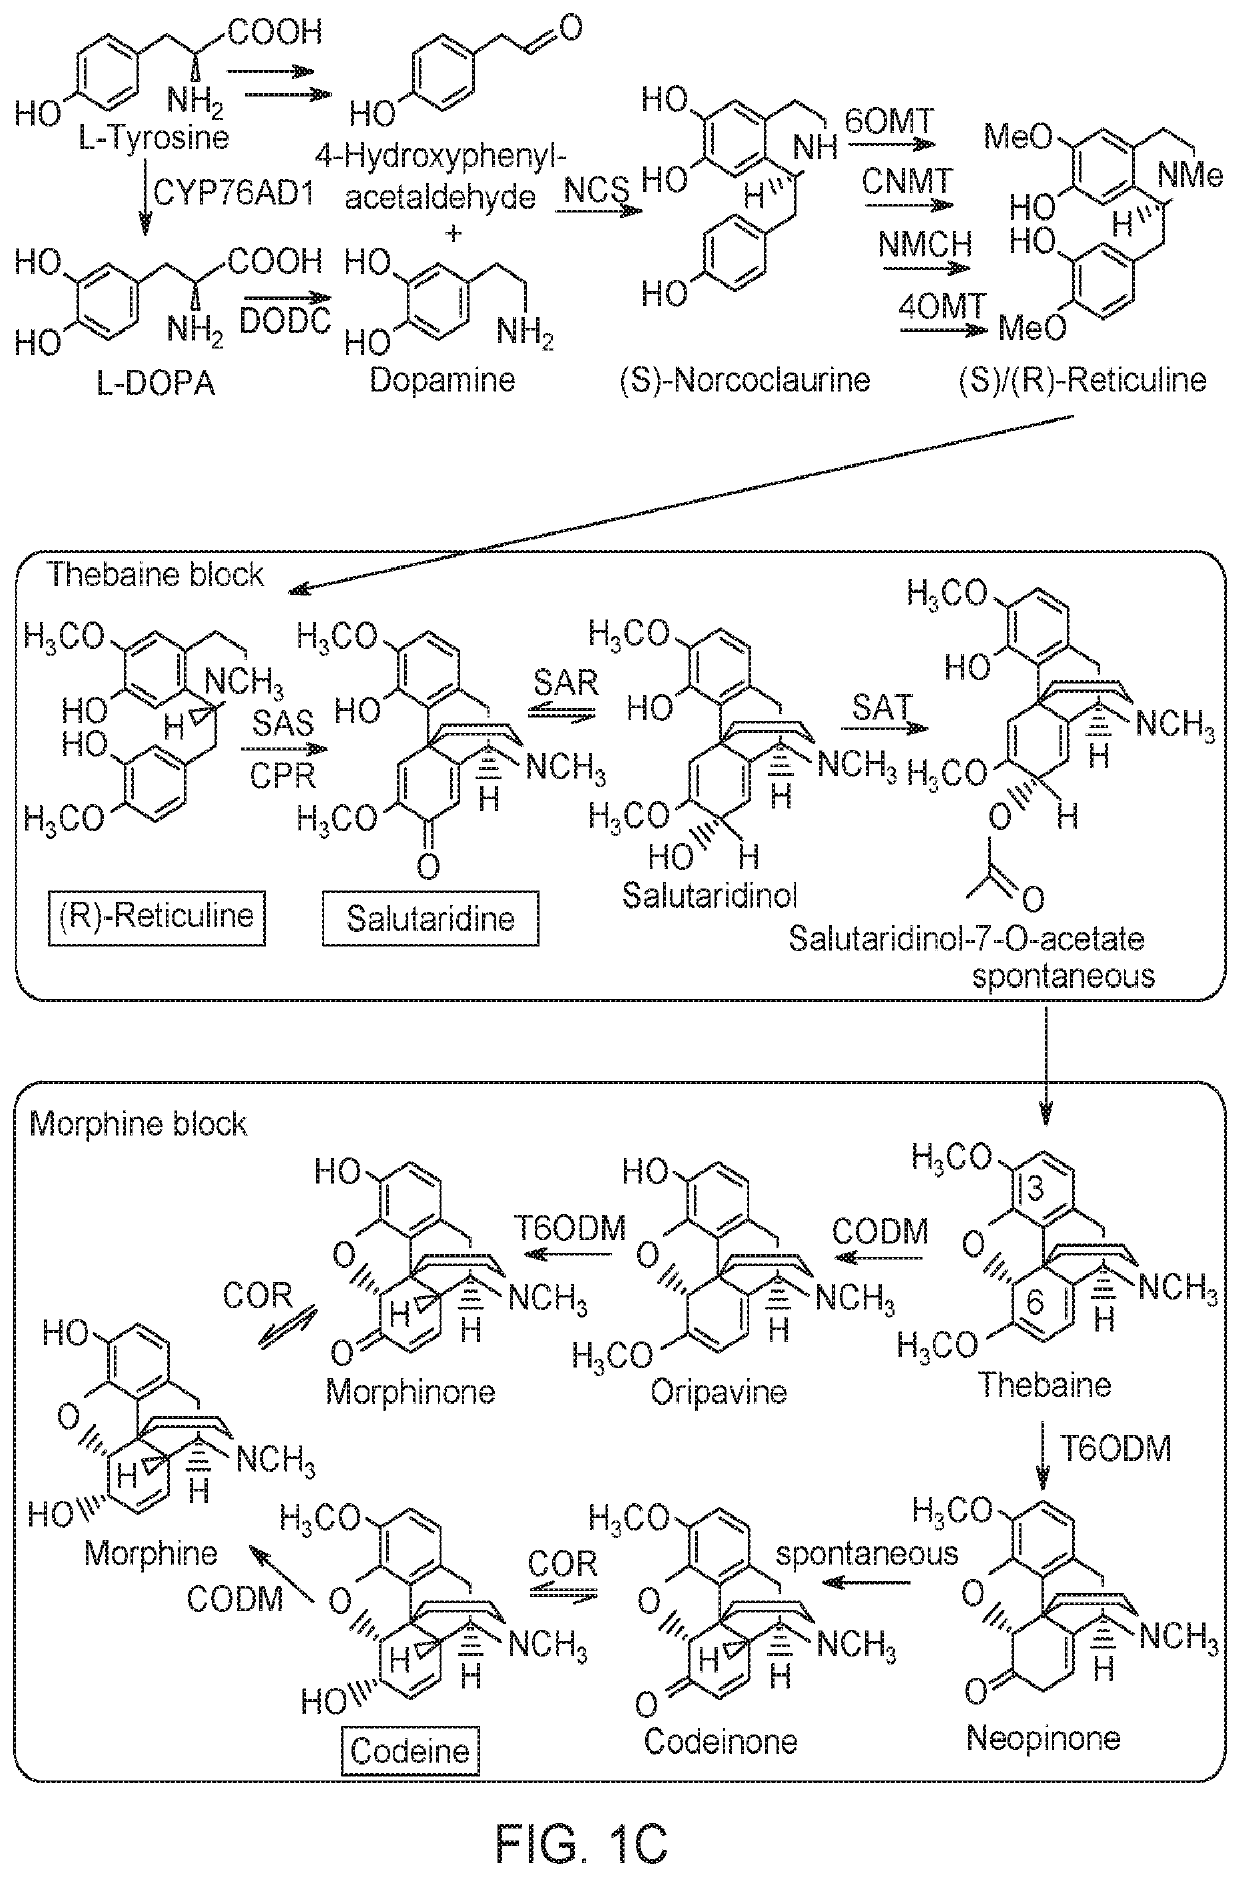 Microorganisms and Methods in the Fermentation of Benzylisoquinoline Alkaloids